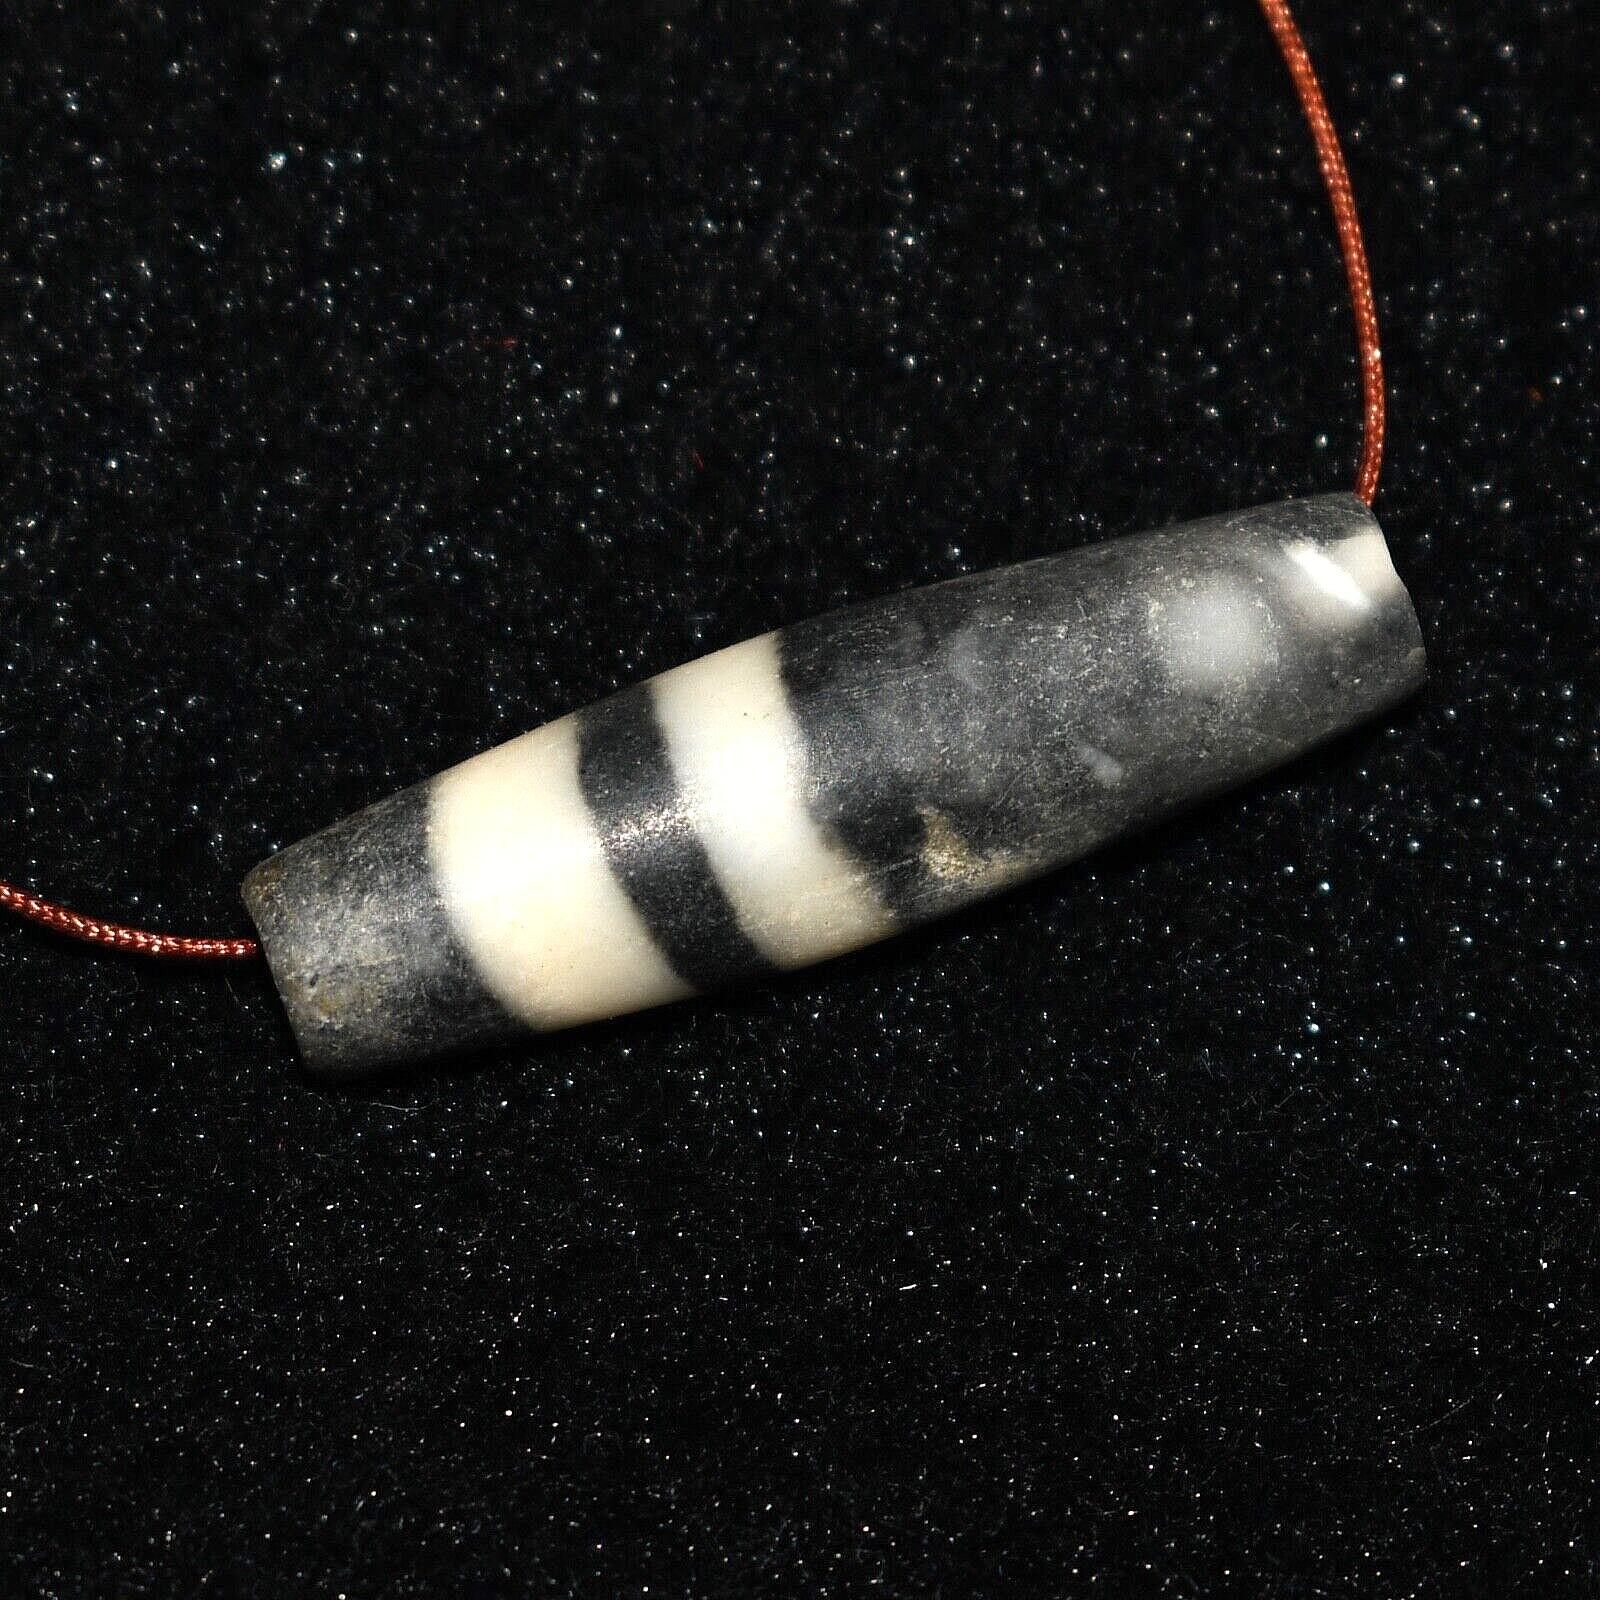 Ancient Central Asian Stone tubular Bead in Good Condition over 2500 Years Old